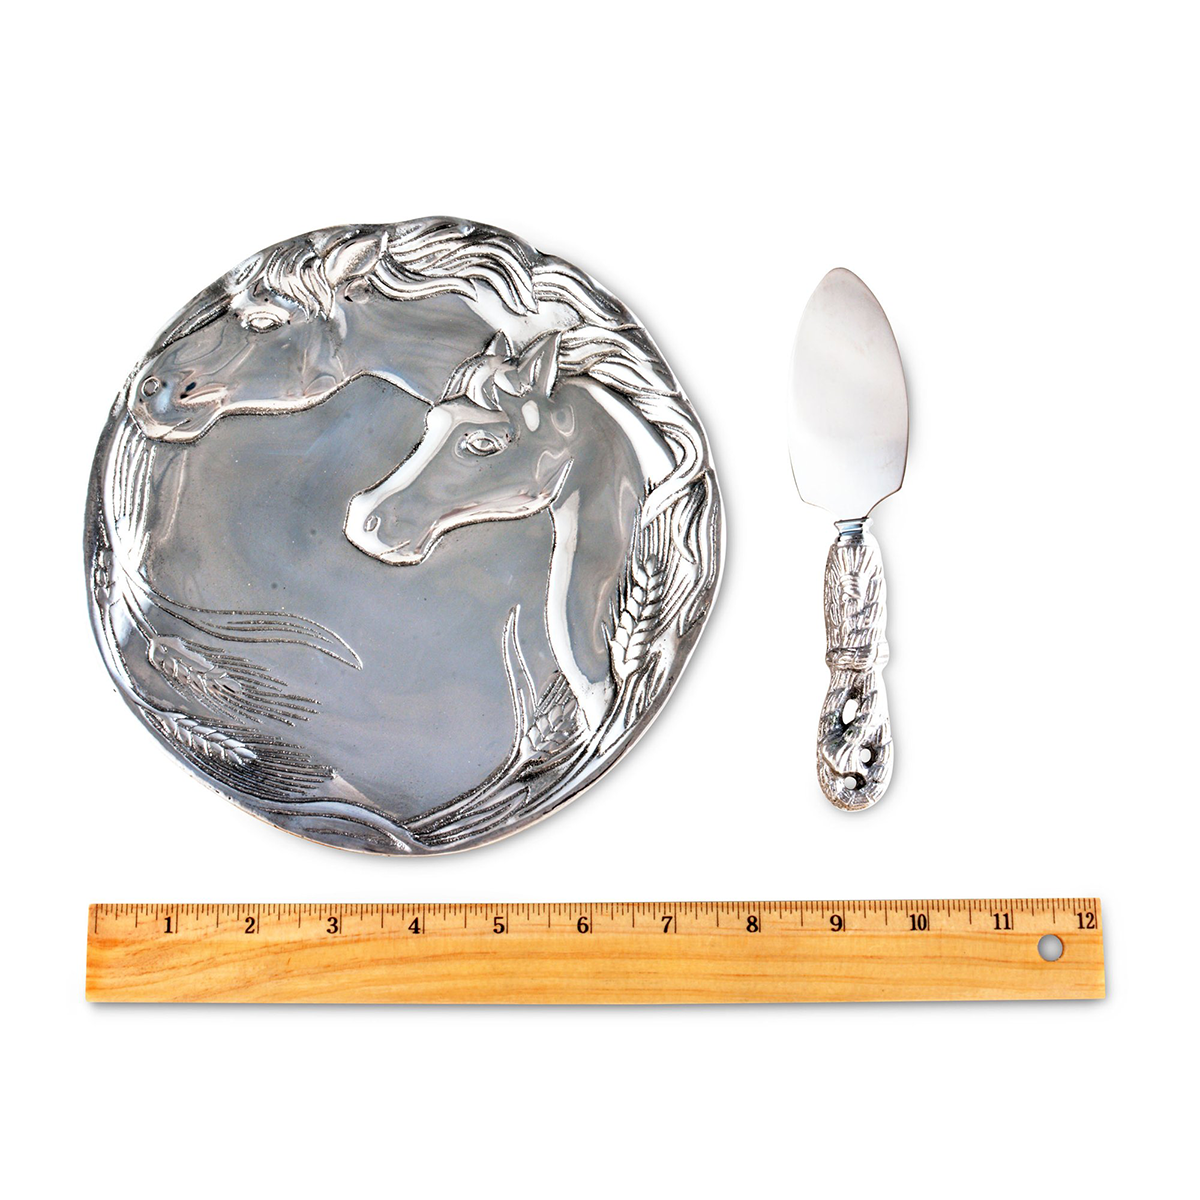 Arthur Court Equestrian Horse Plate with Server